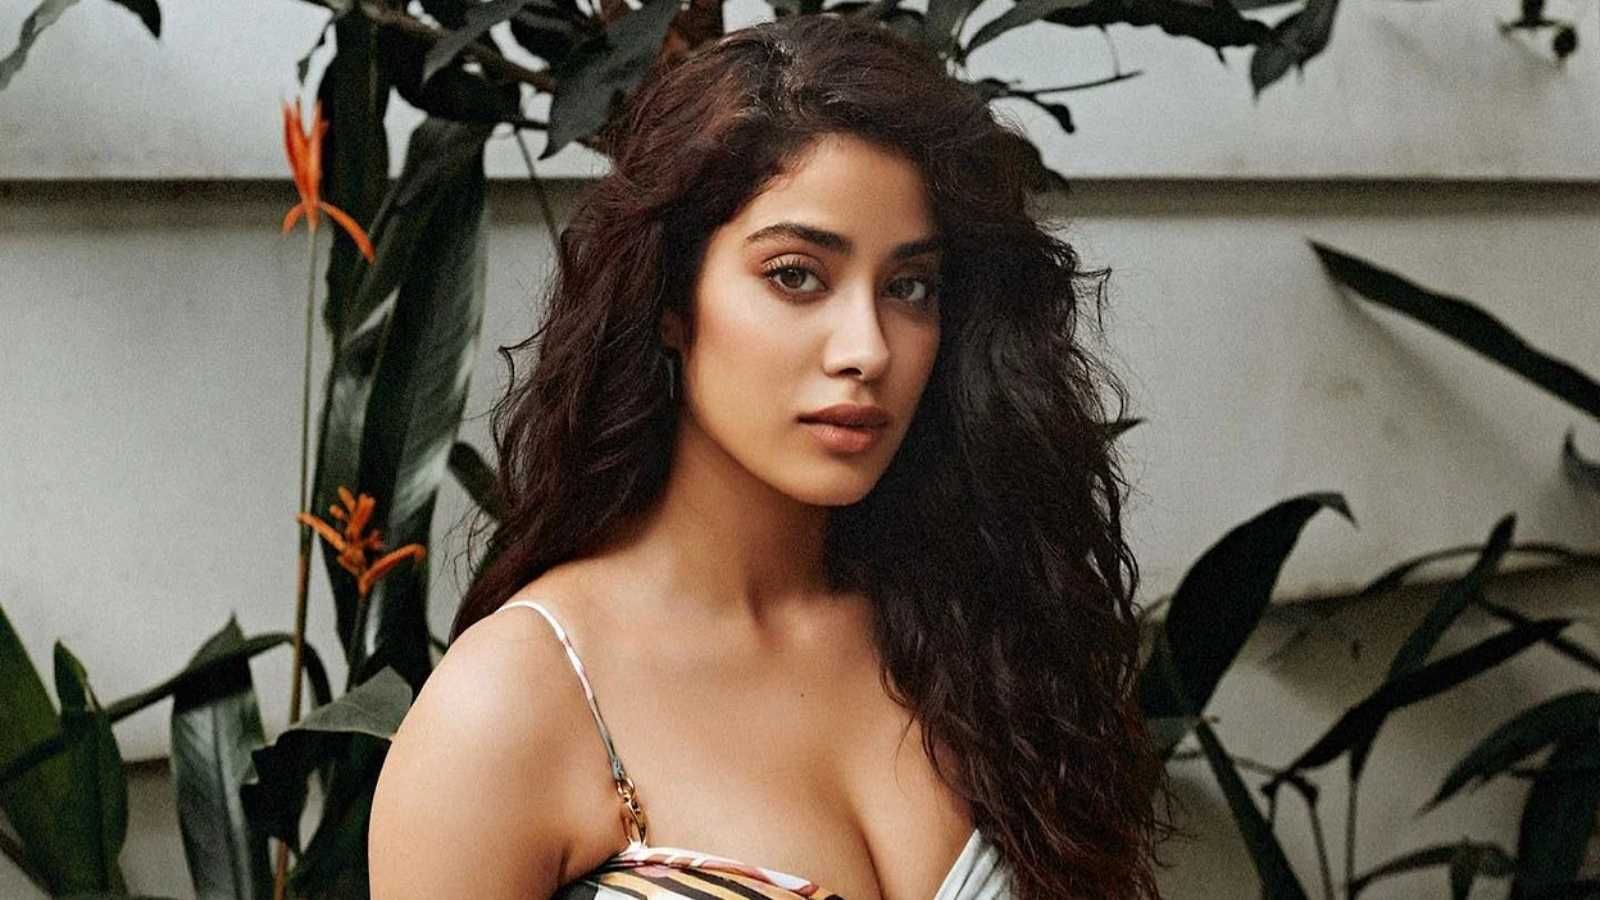 janhvi-kapoor-against-remake-of-sridevi-s-iconic-chaal-baaz-led-by-shraddha-kapoor-does-she-want-to-star-in-the-film-instead